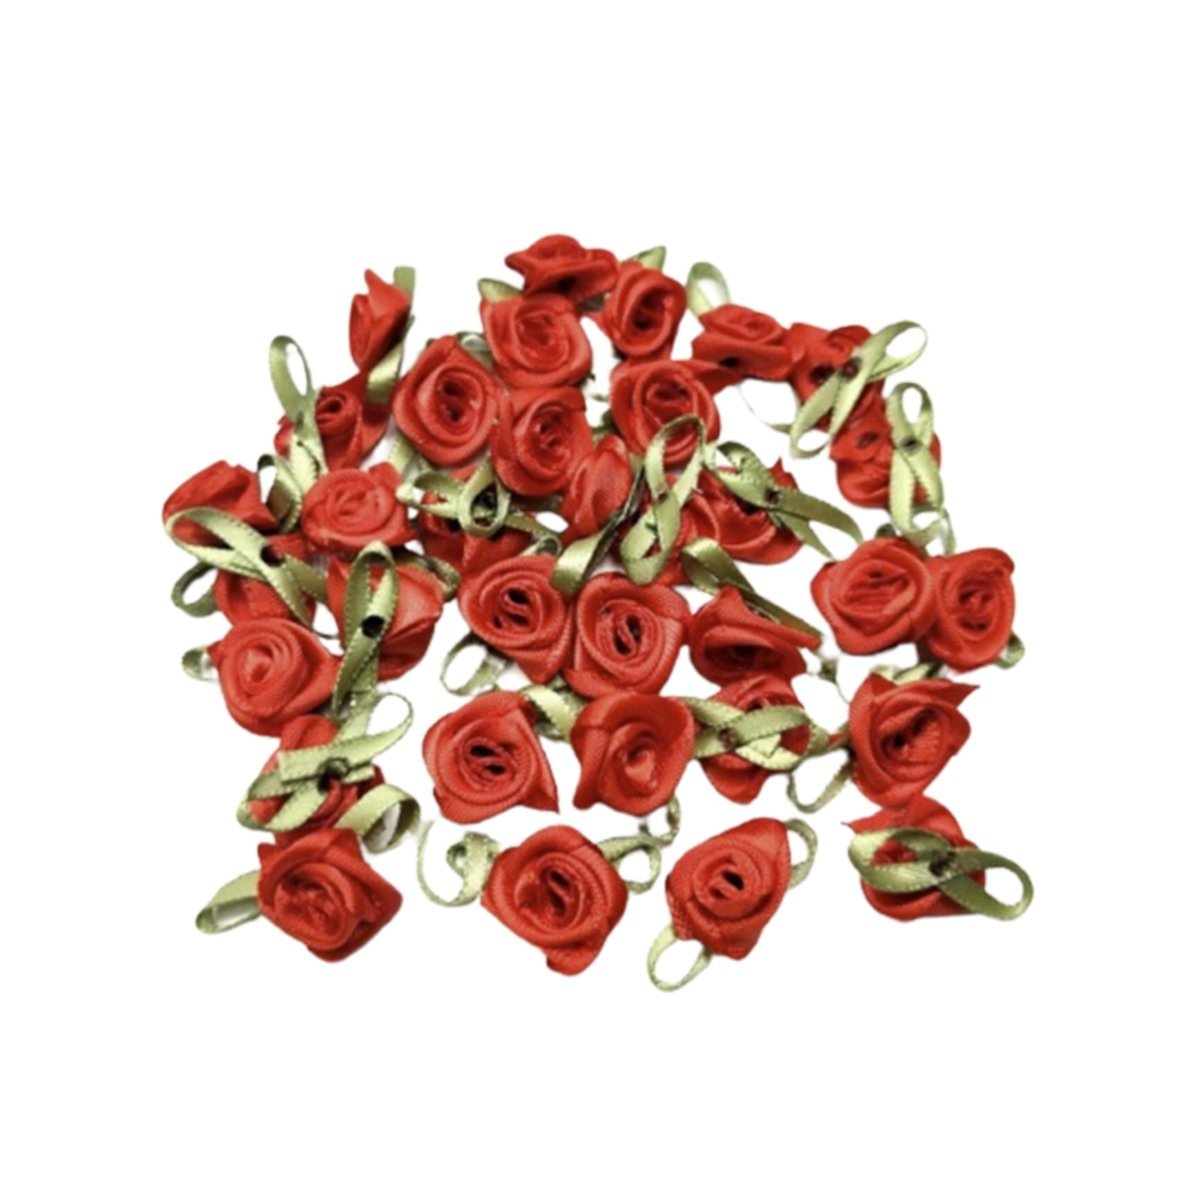 40pcs Mini Artificial Flowers Heads Small Ribbon Roses DIY Crafts Wedding Decorations - Red - - Asia Sell